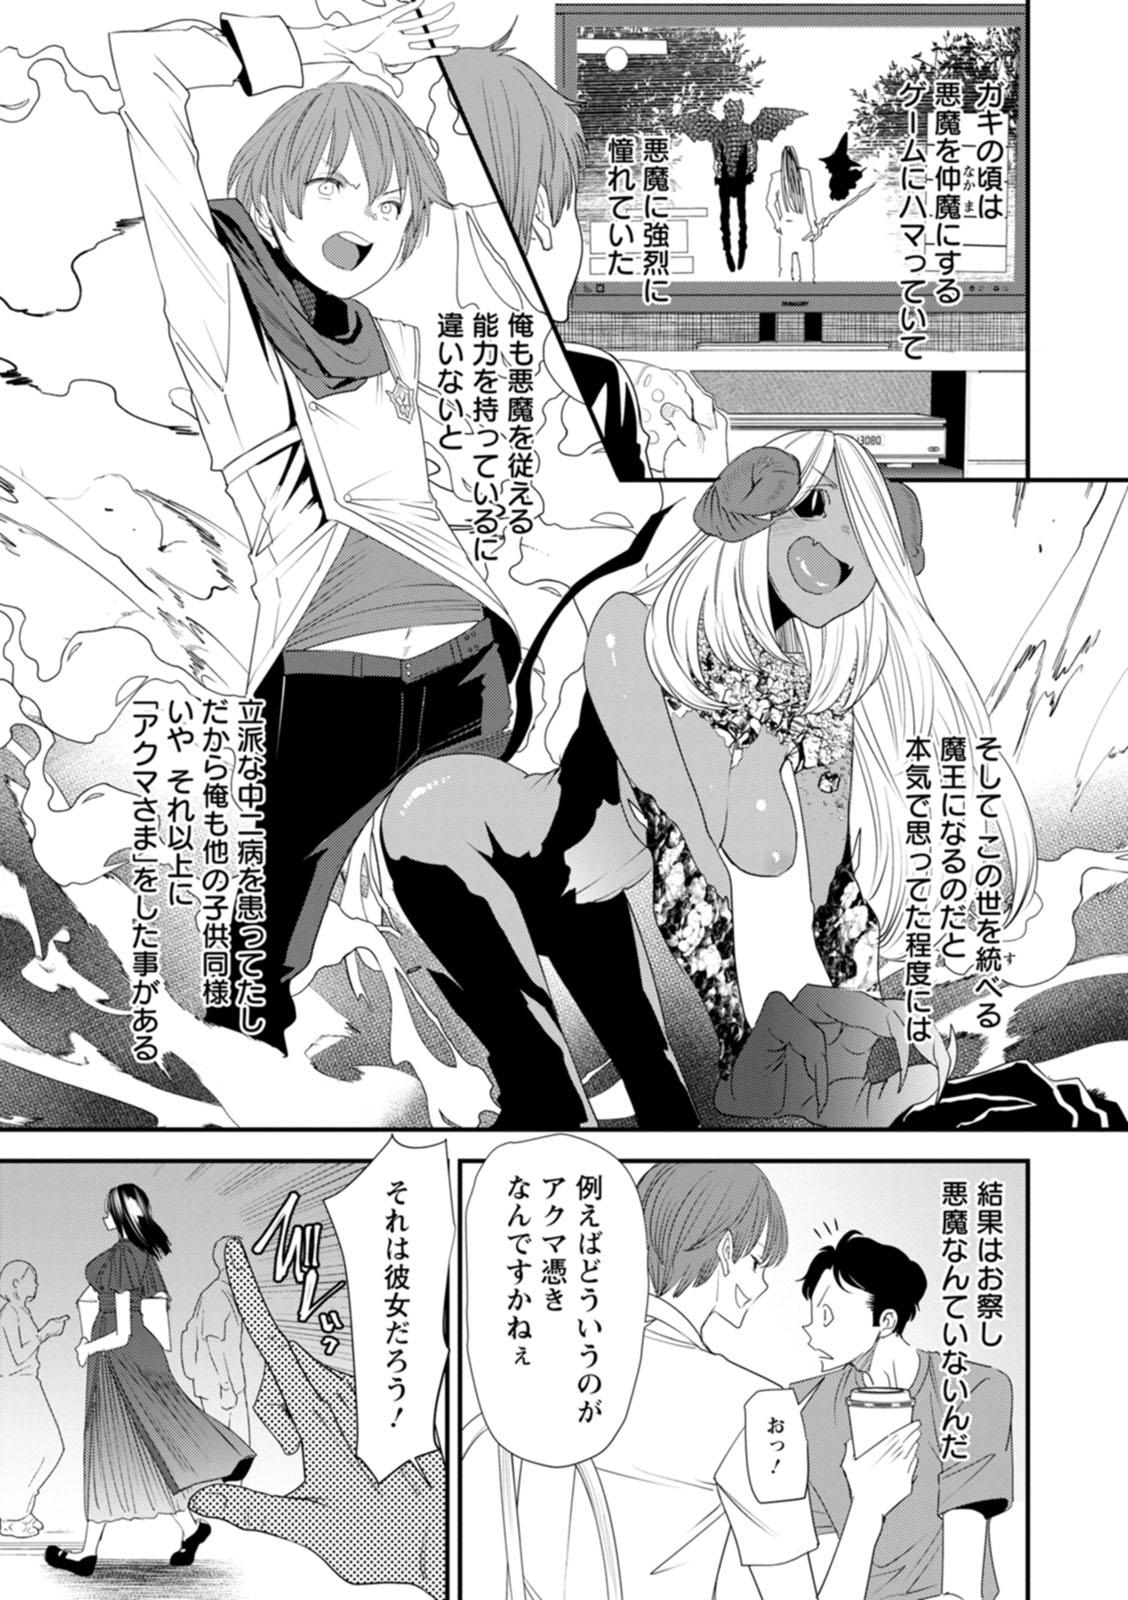 Flash Inma Joshi Daisei no Yuuutsu - The Melancholy of the Succubus who is a college student Cfnm - Page 9